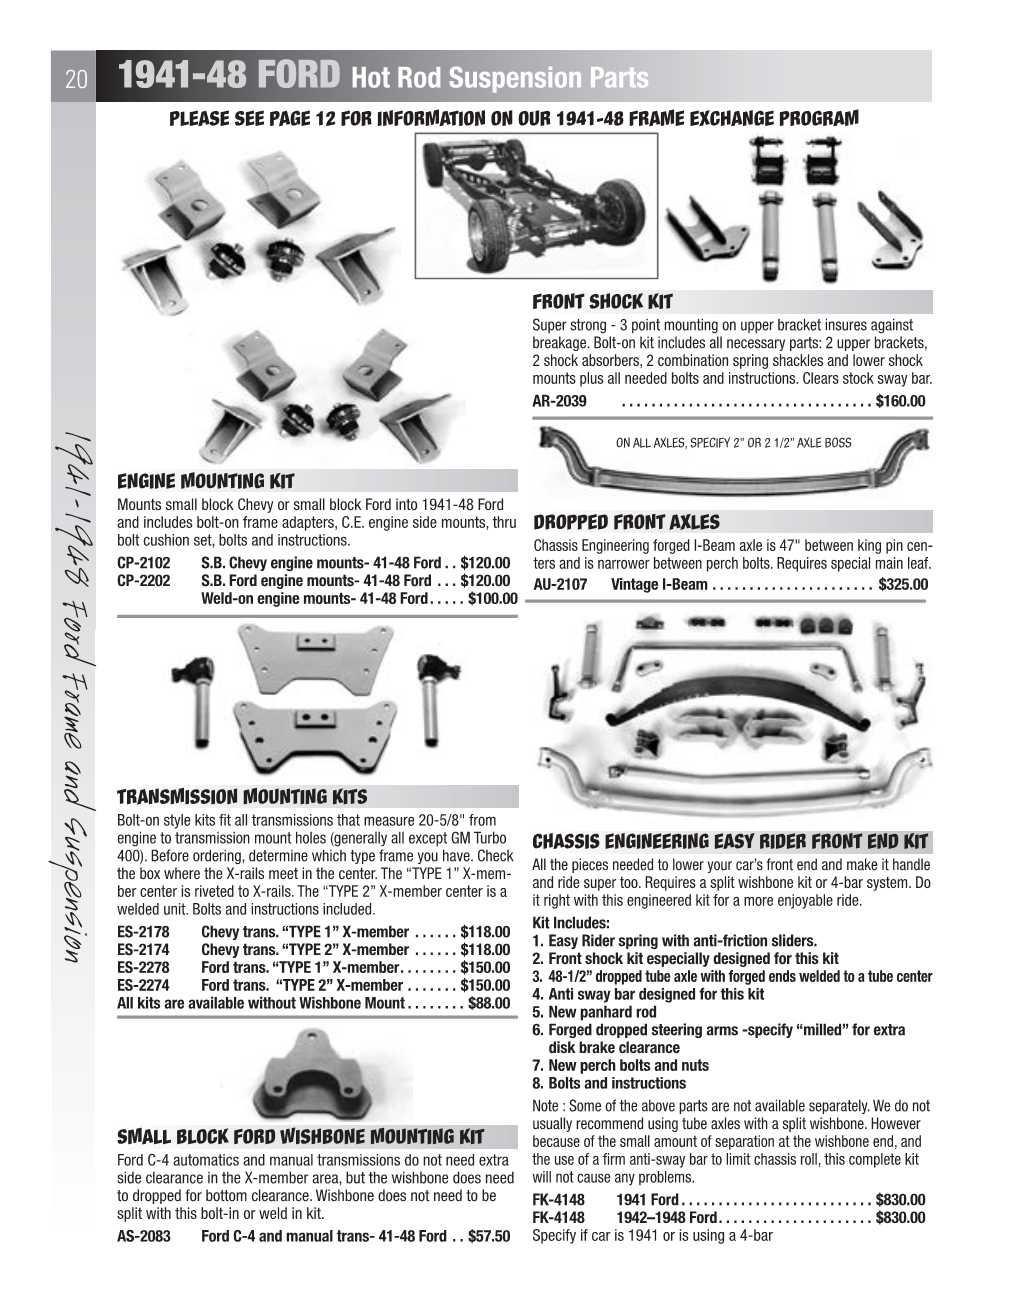 20 1941-48 FORD Hot Rod Suspension Parts Please See Page 12 for Information on Our 1941-48 Frame Exchange Program